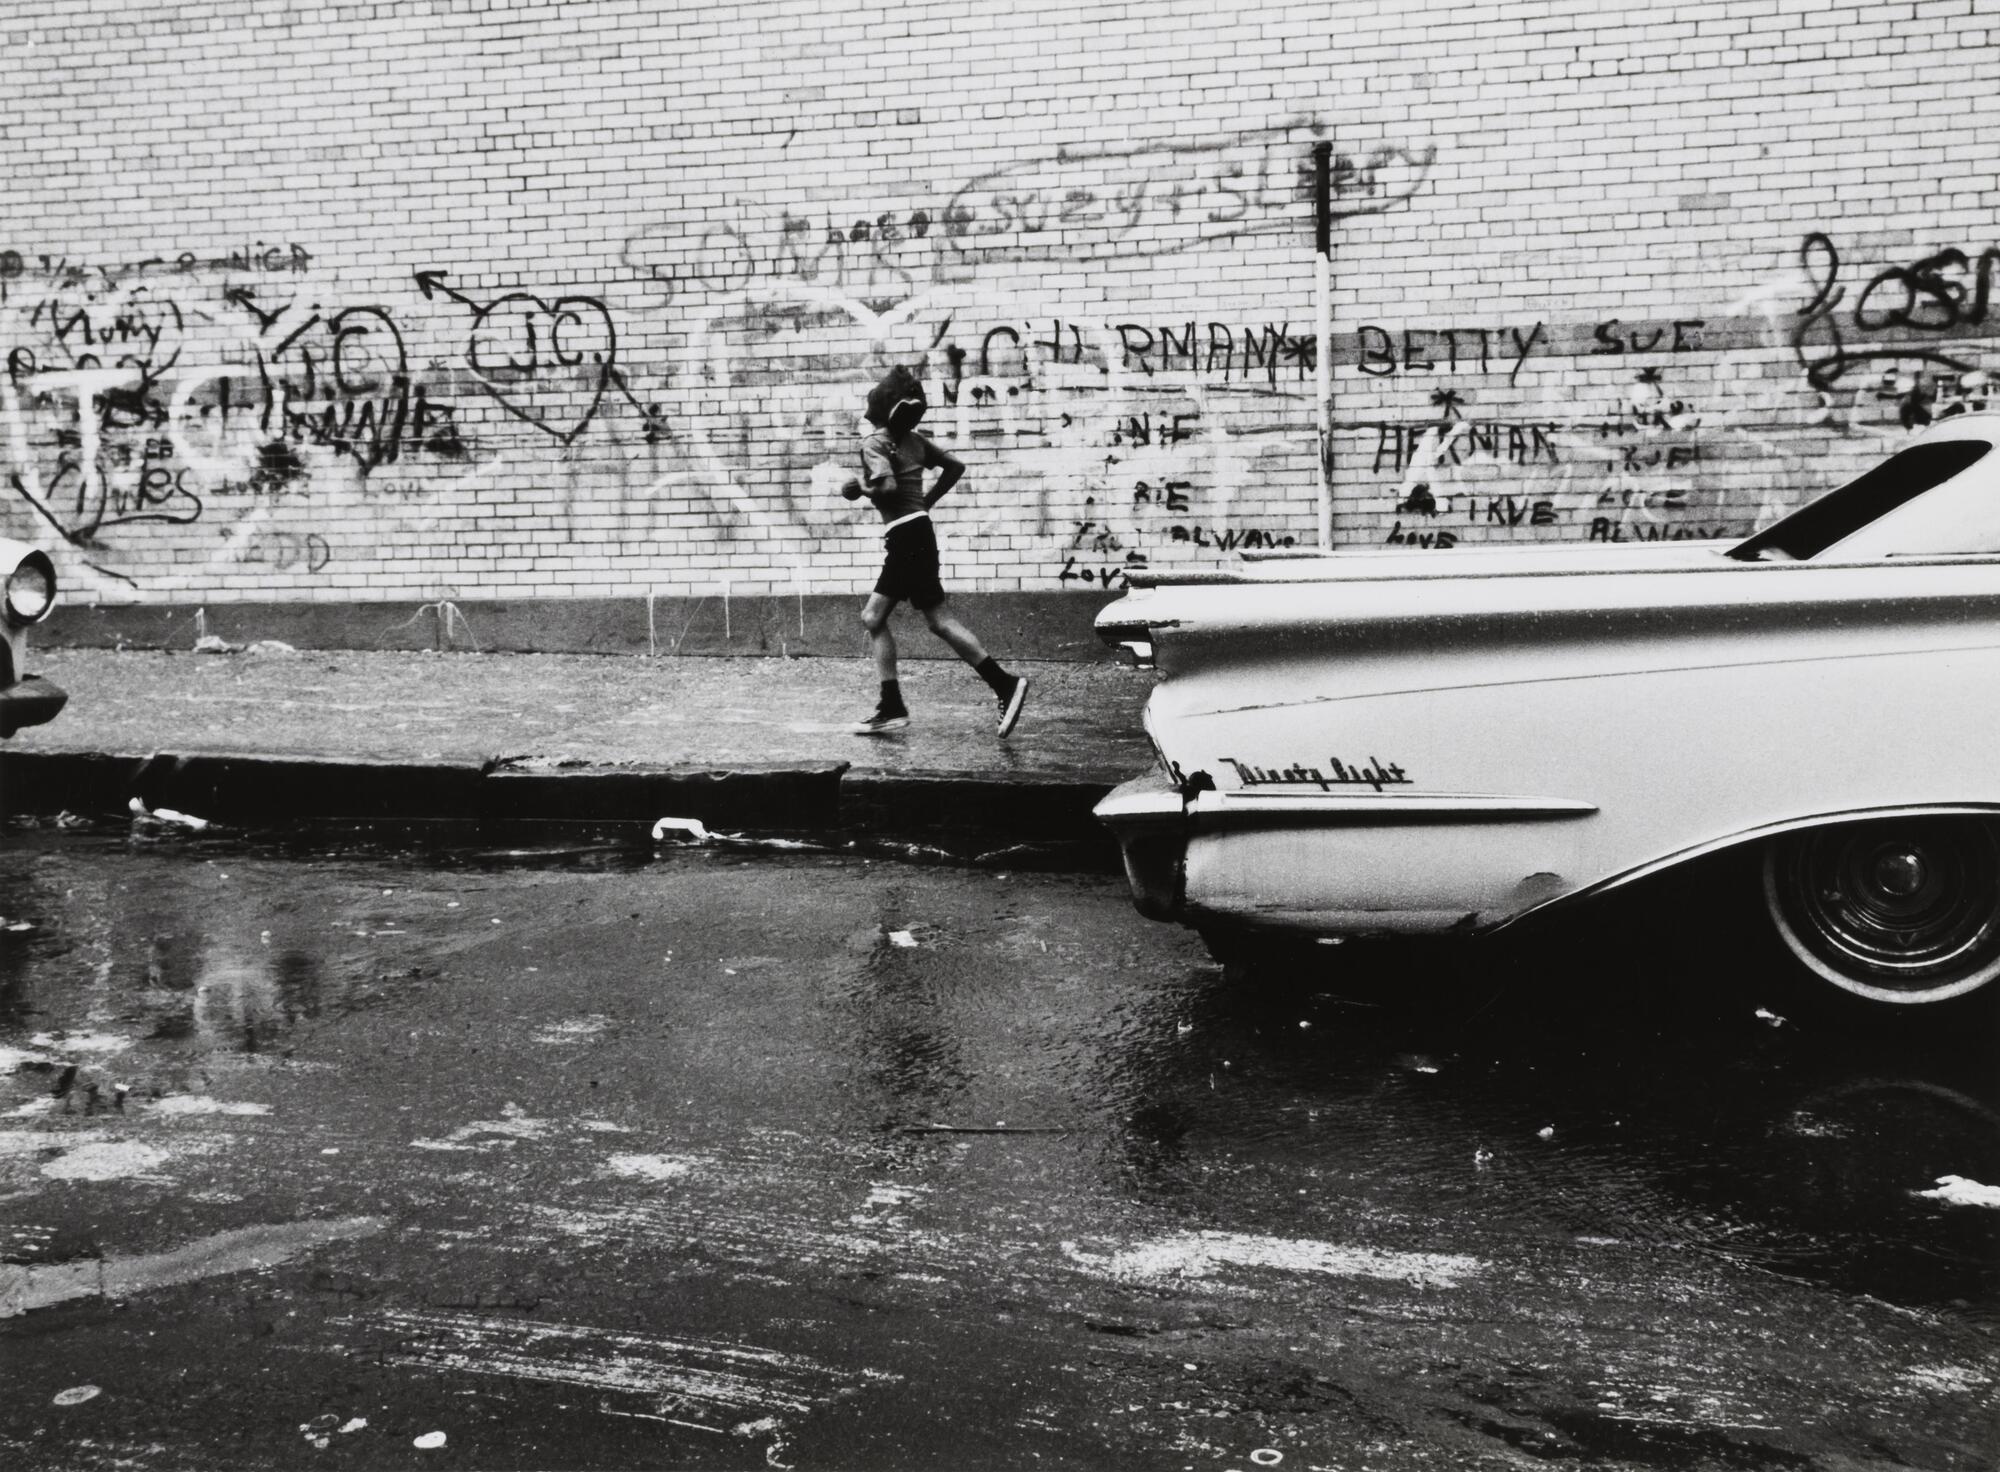 A boy in shorts runs along the side of a graffiti- covered brick building. He passes a parked car with tail fins.